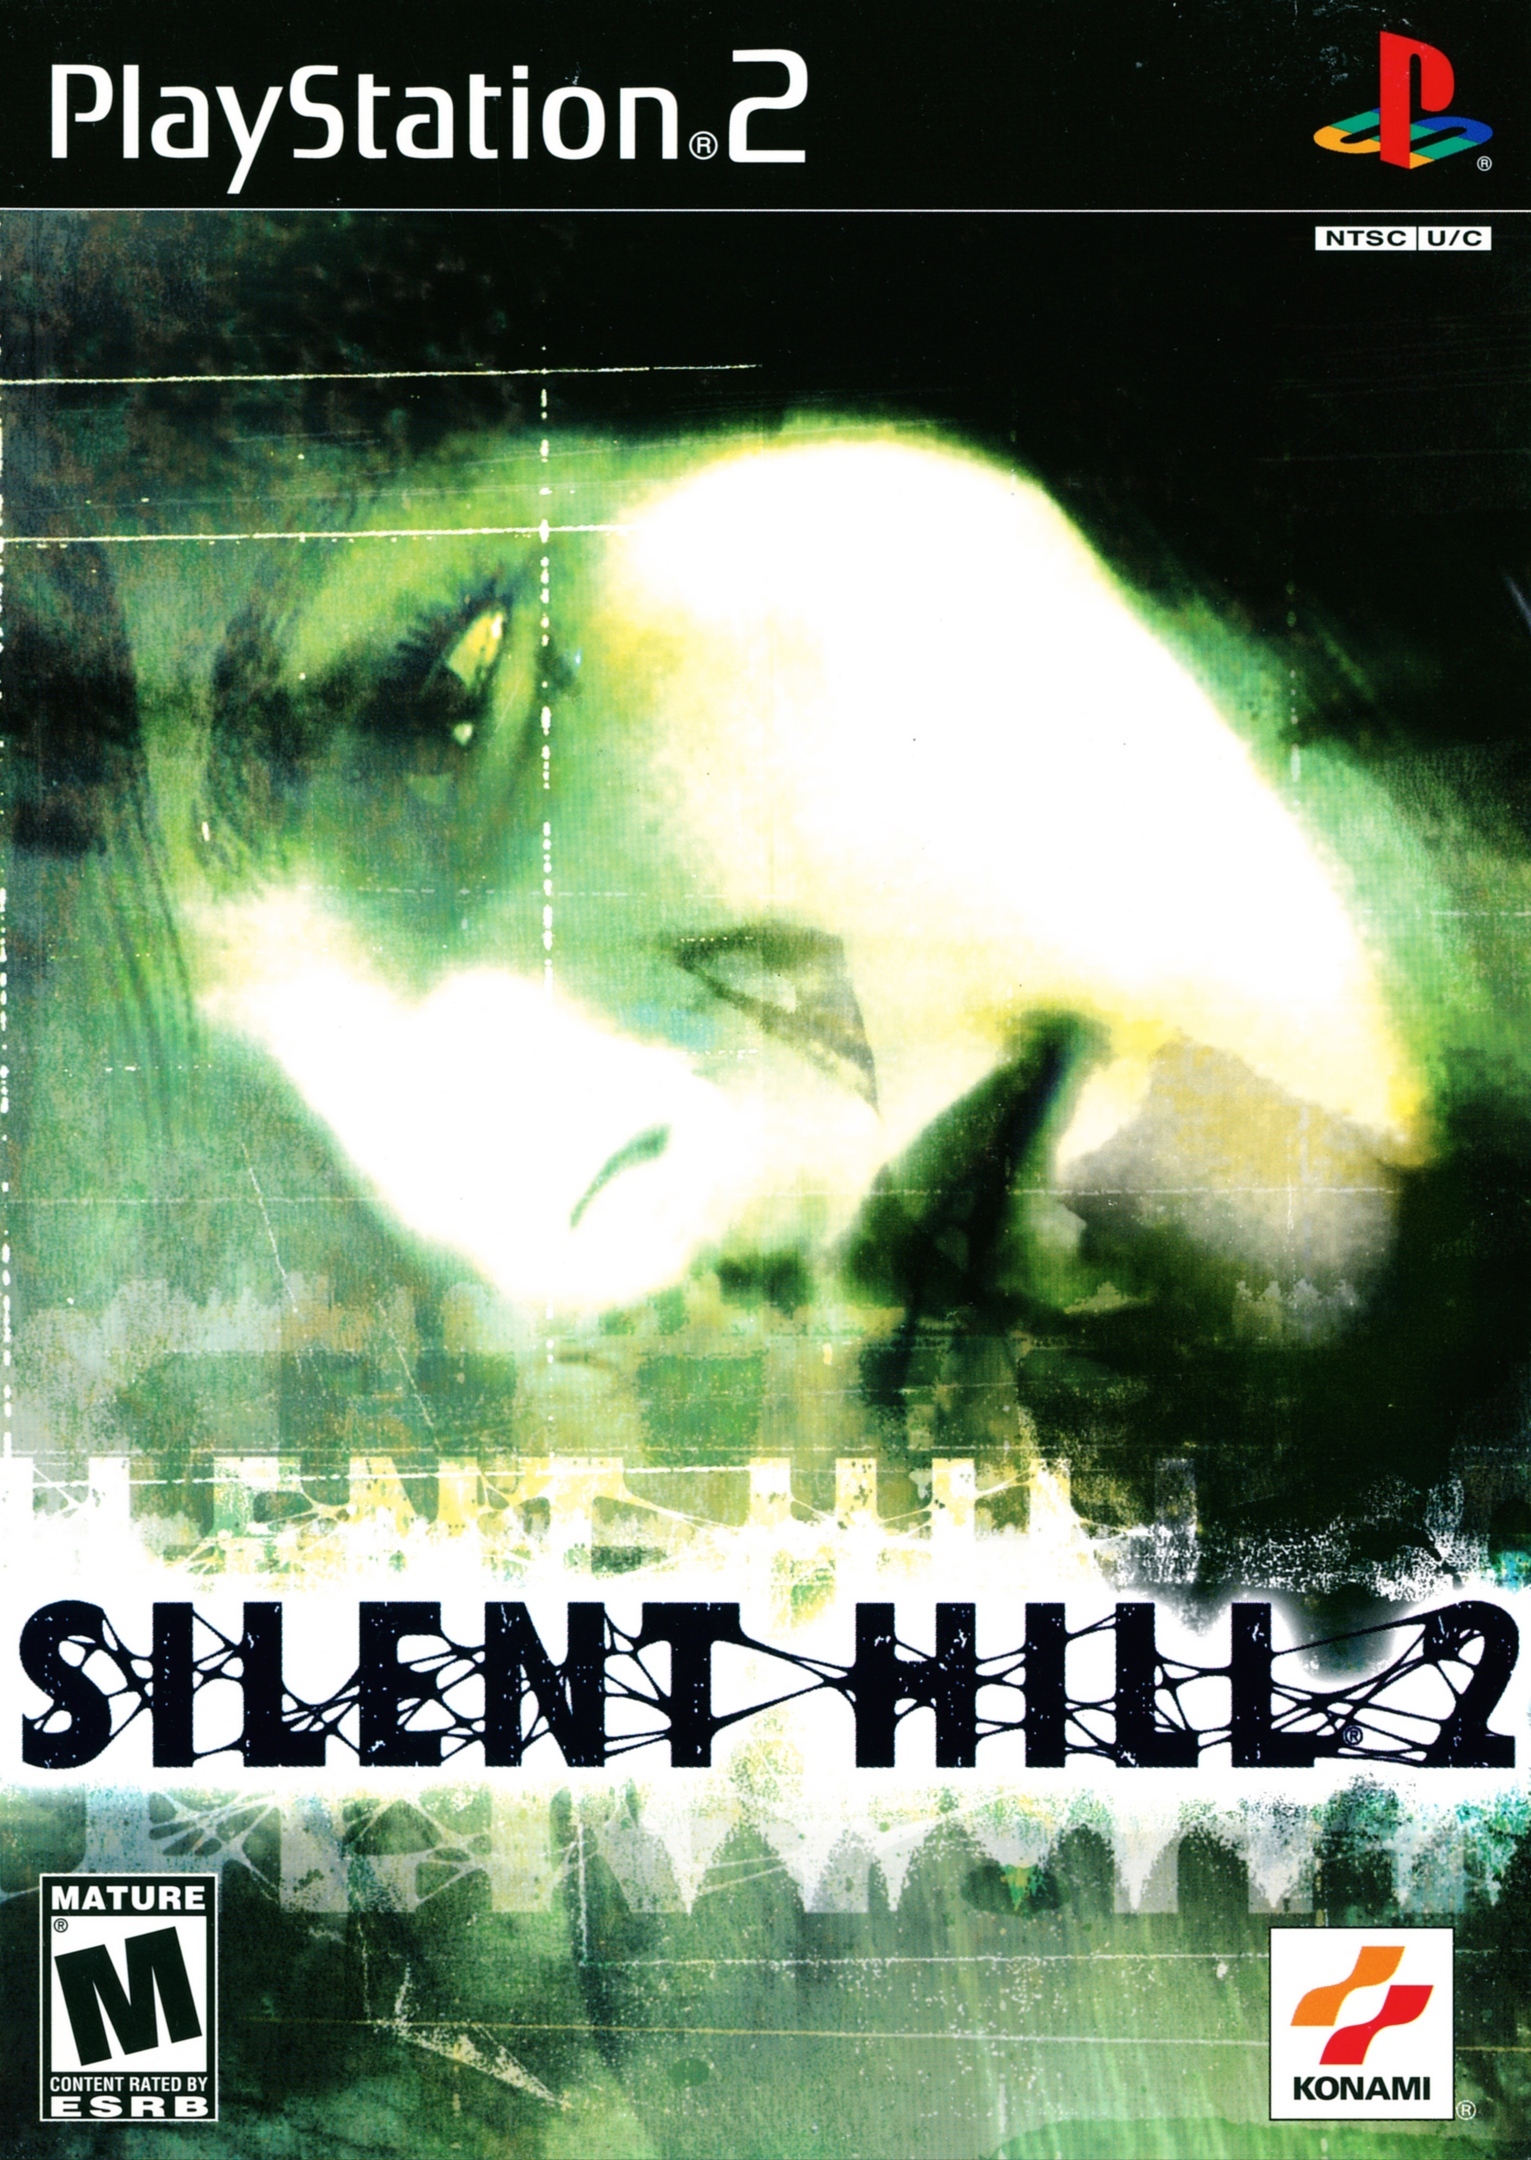 Is There a Silent Hill 1 Remake for PC, PS5, or PS4? - GameRevolution